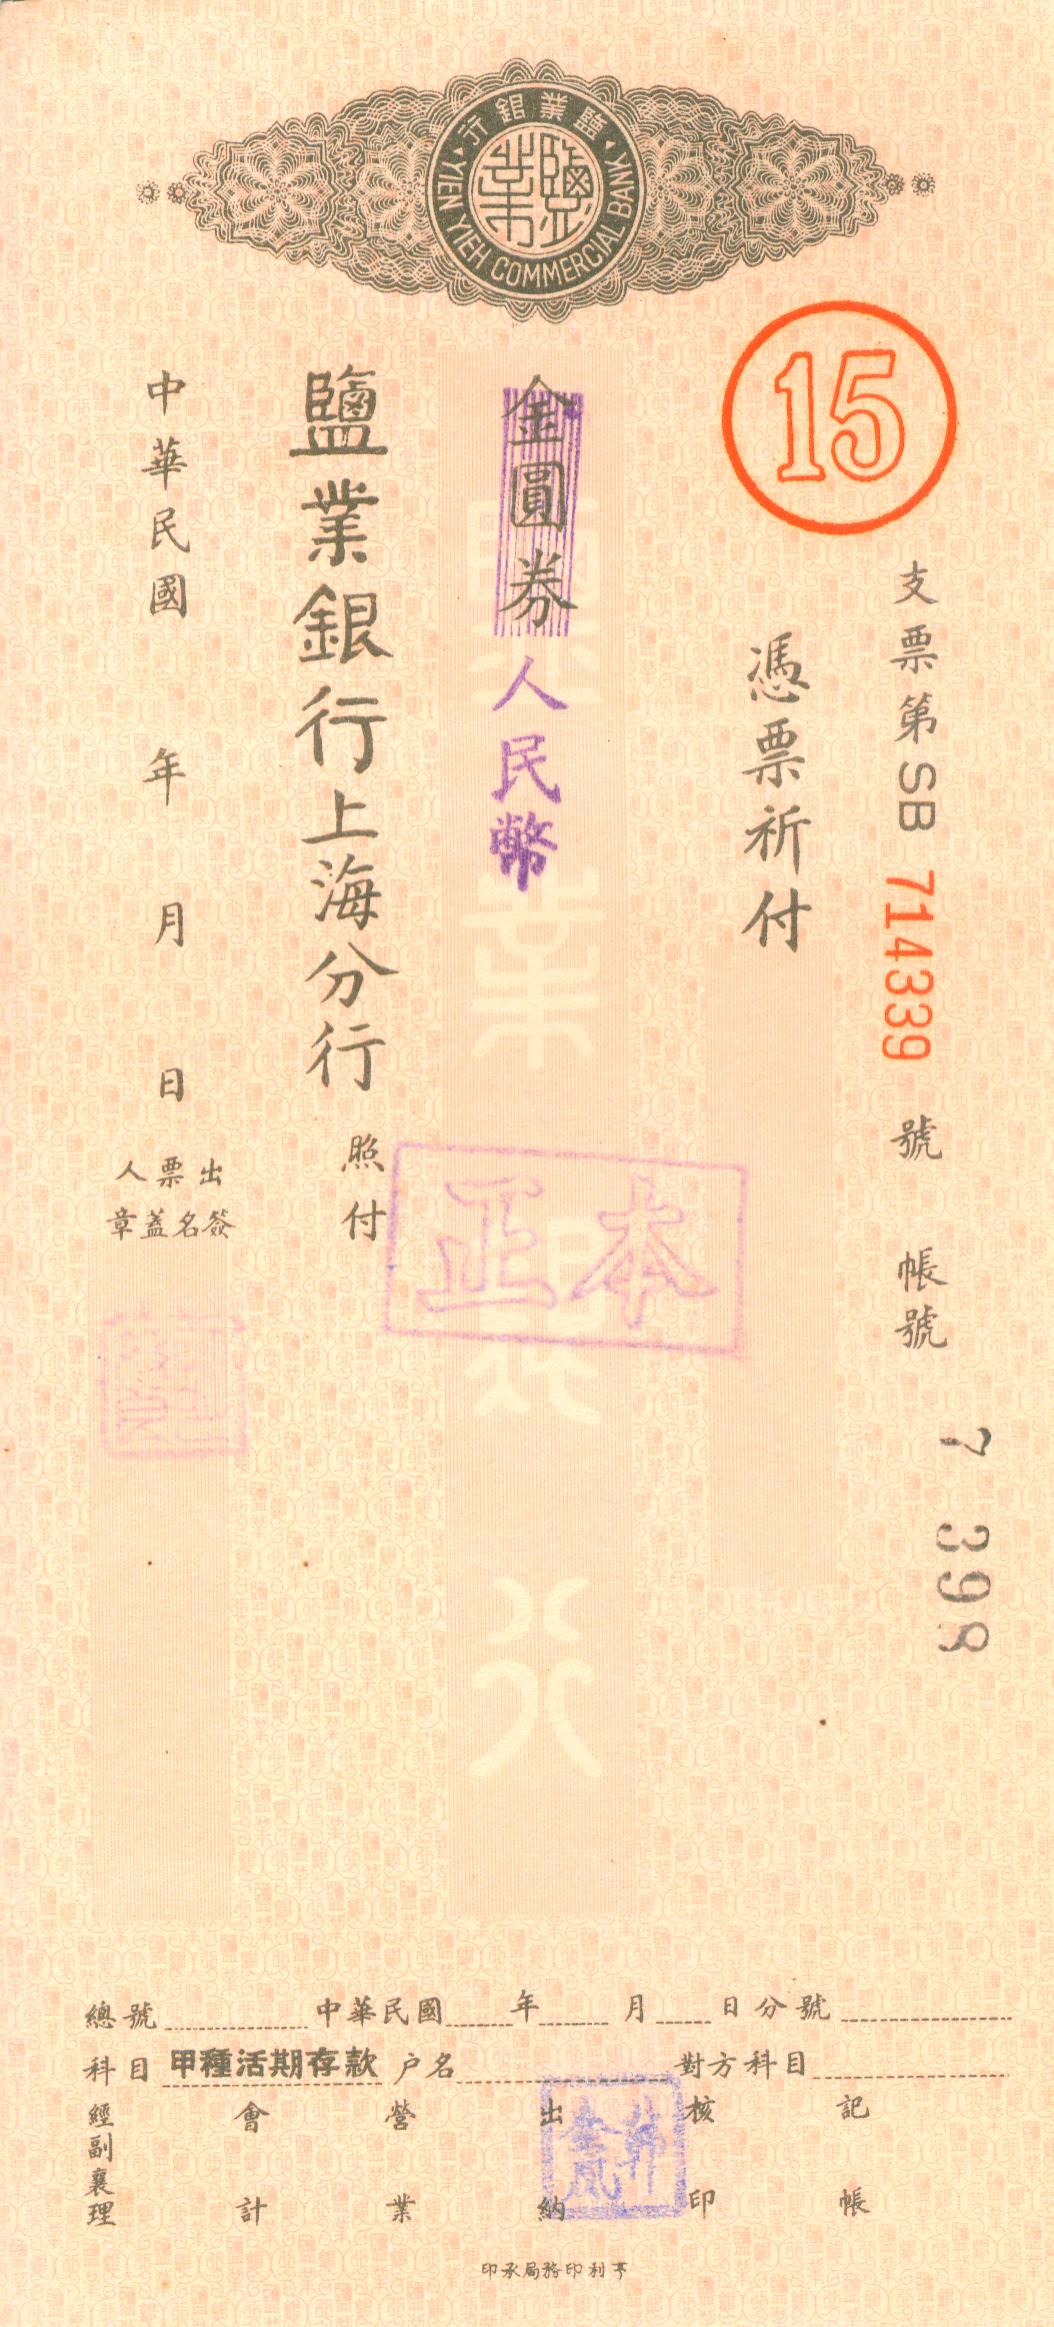 D1805, Check of China Salt Bank, Shanghai, 1940's Cheque